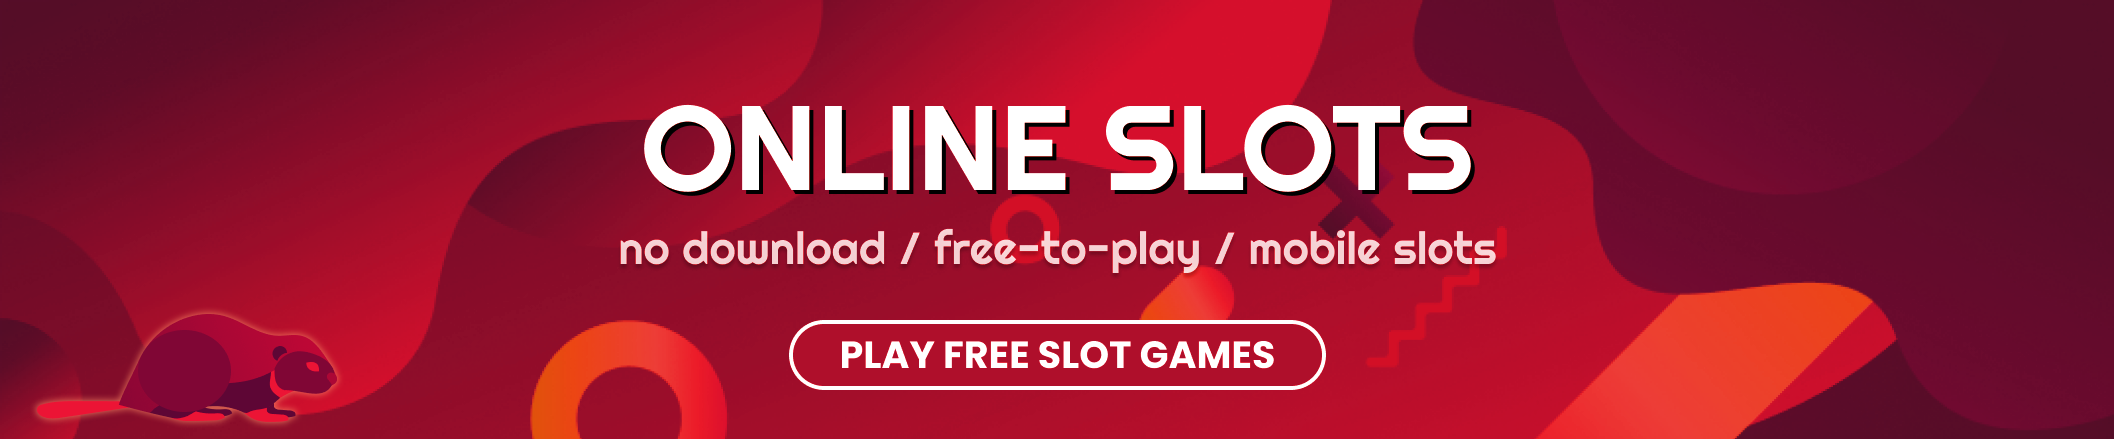 Online Slots: no download, free-to-play, mobile slots